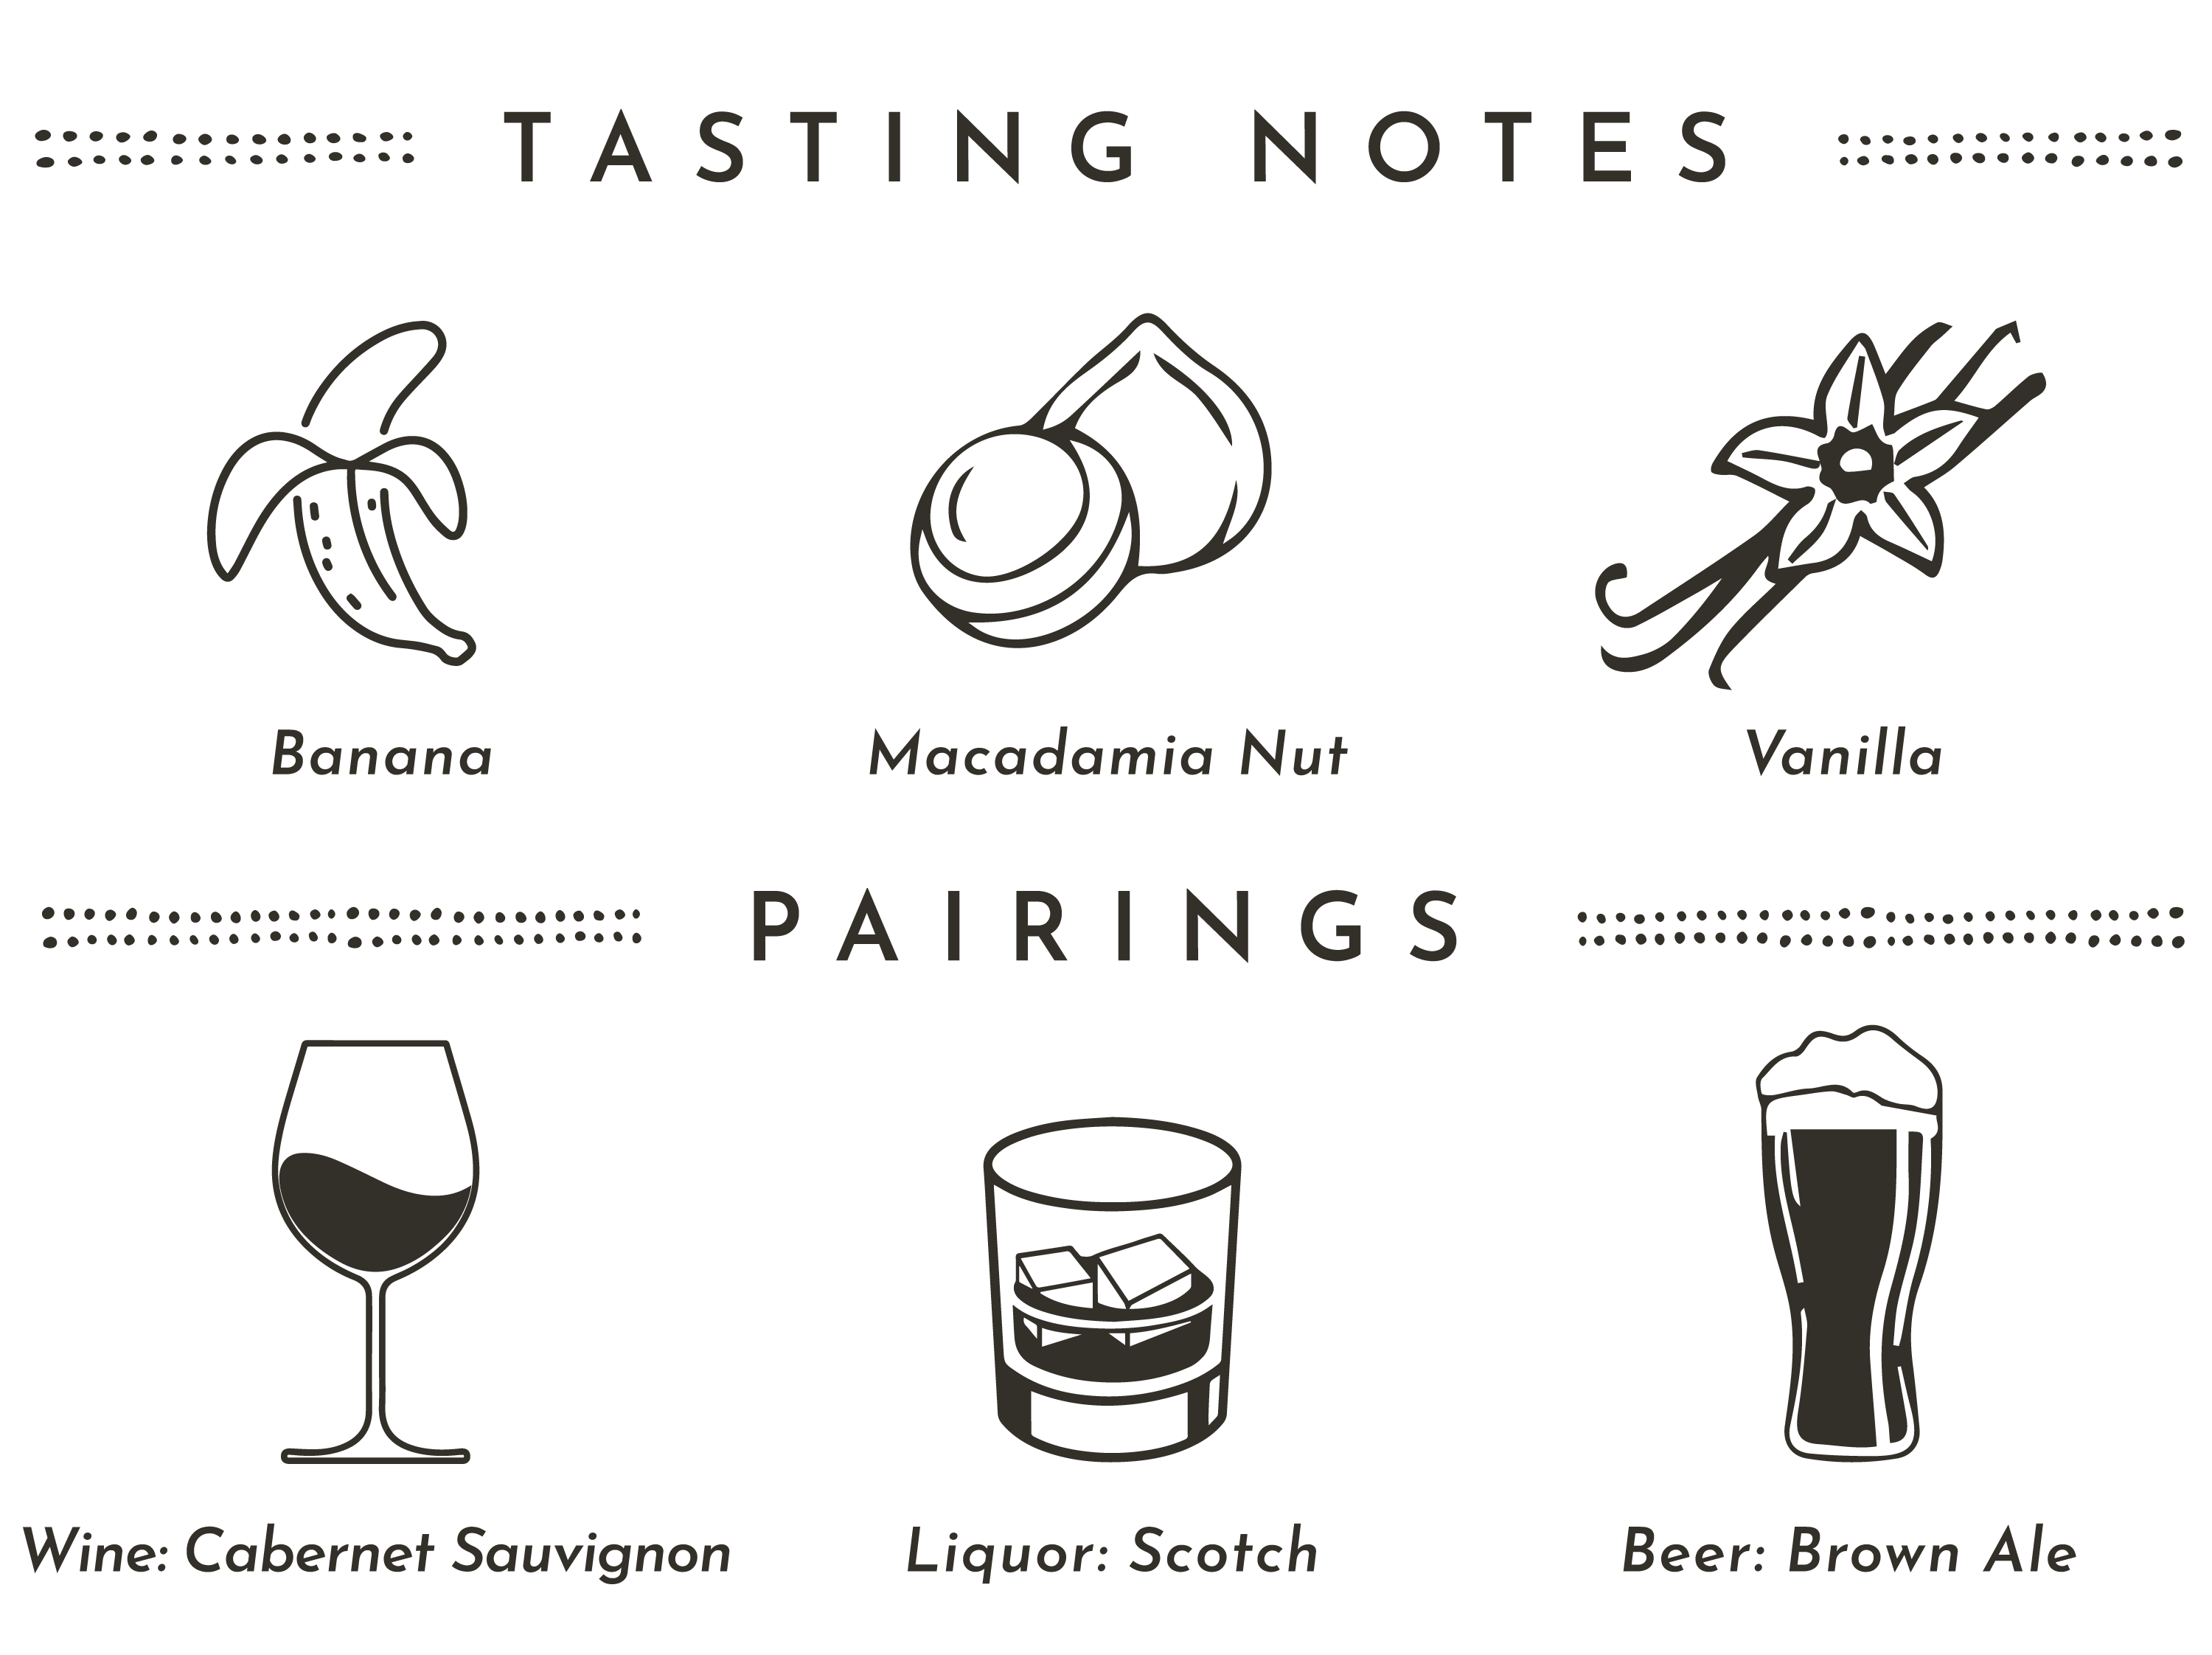 tasting notes are banana, macadamia nut, vanilla and alcohol pairings are cabernet sauvignon, scotch and brown ale